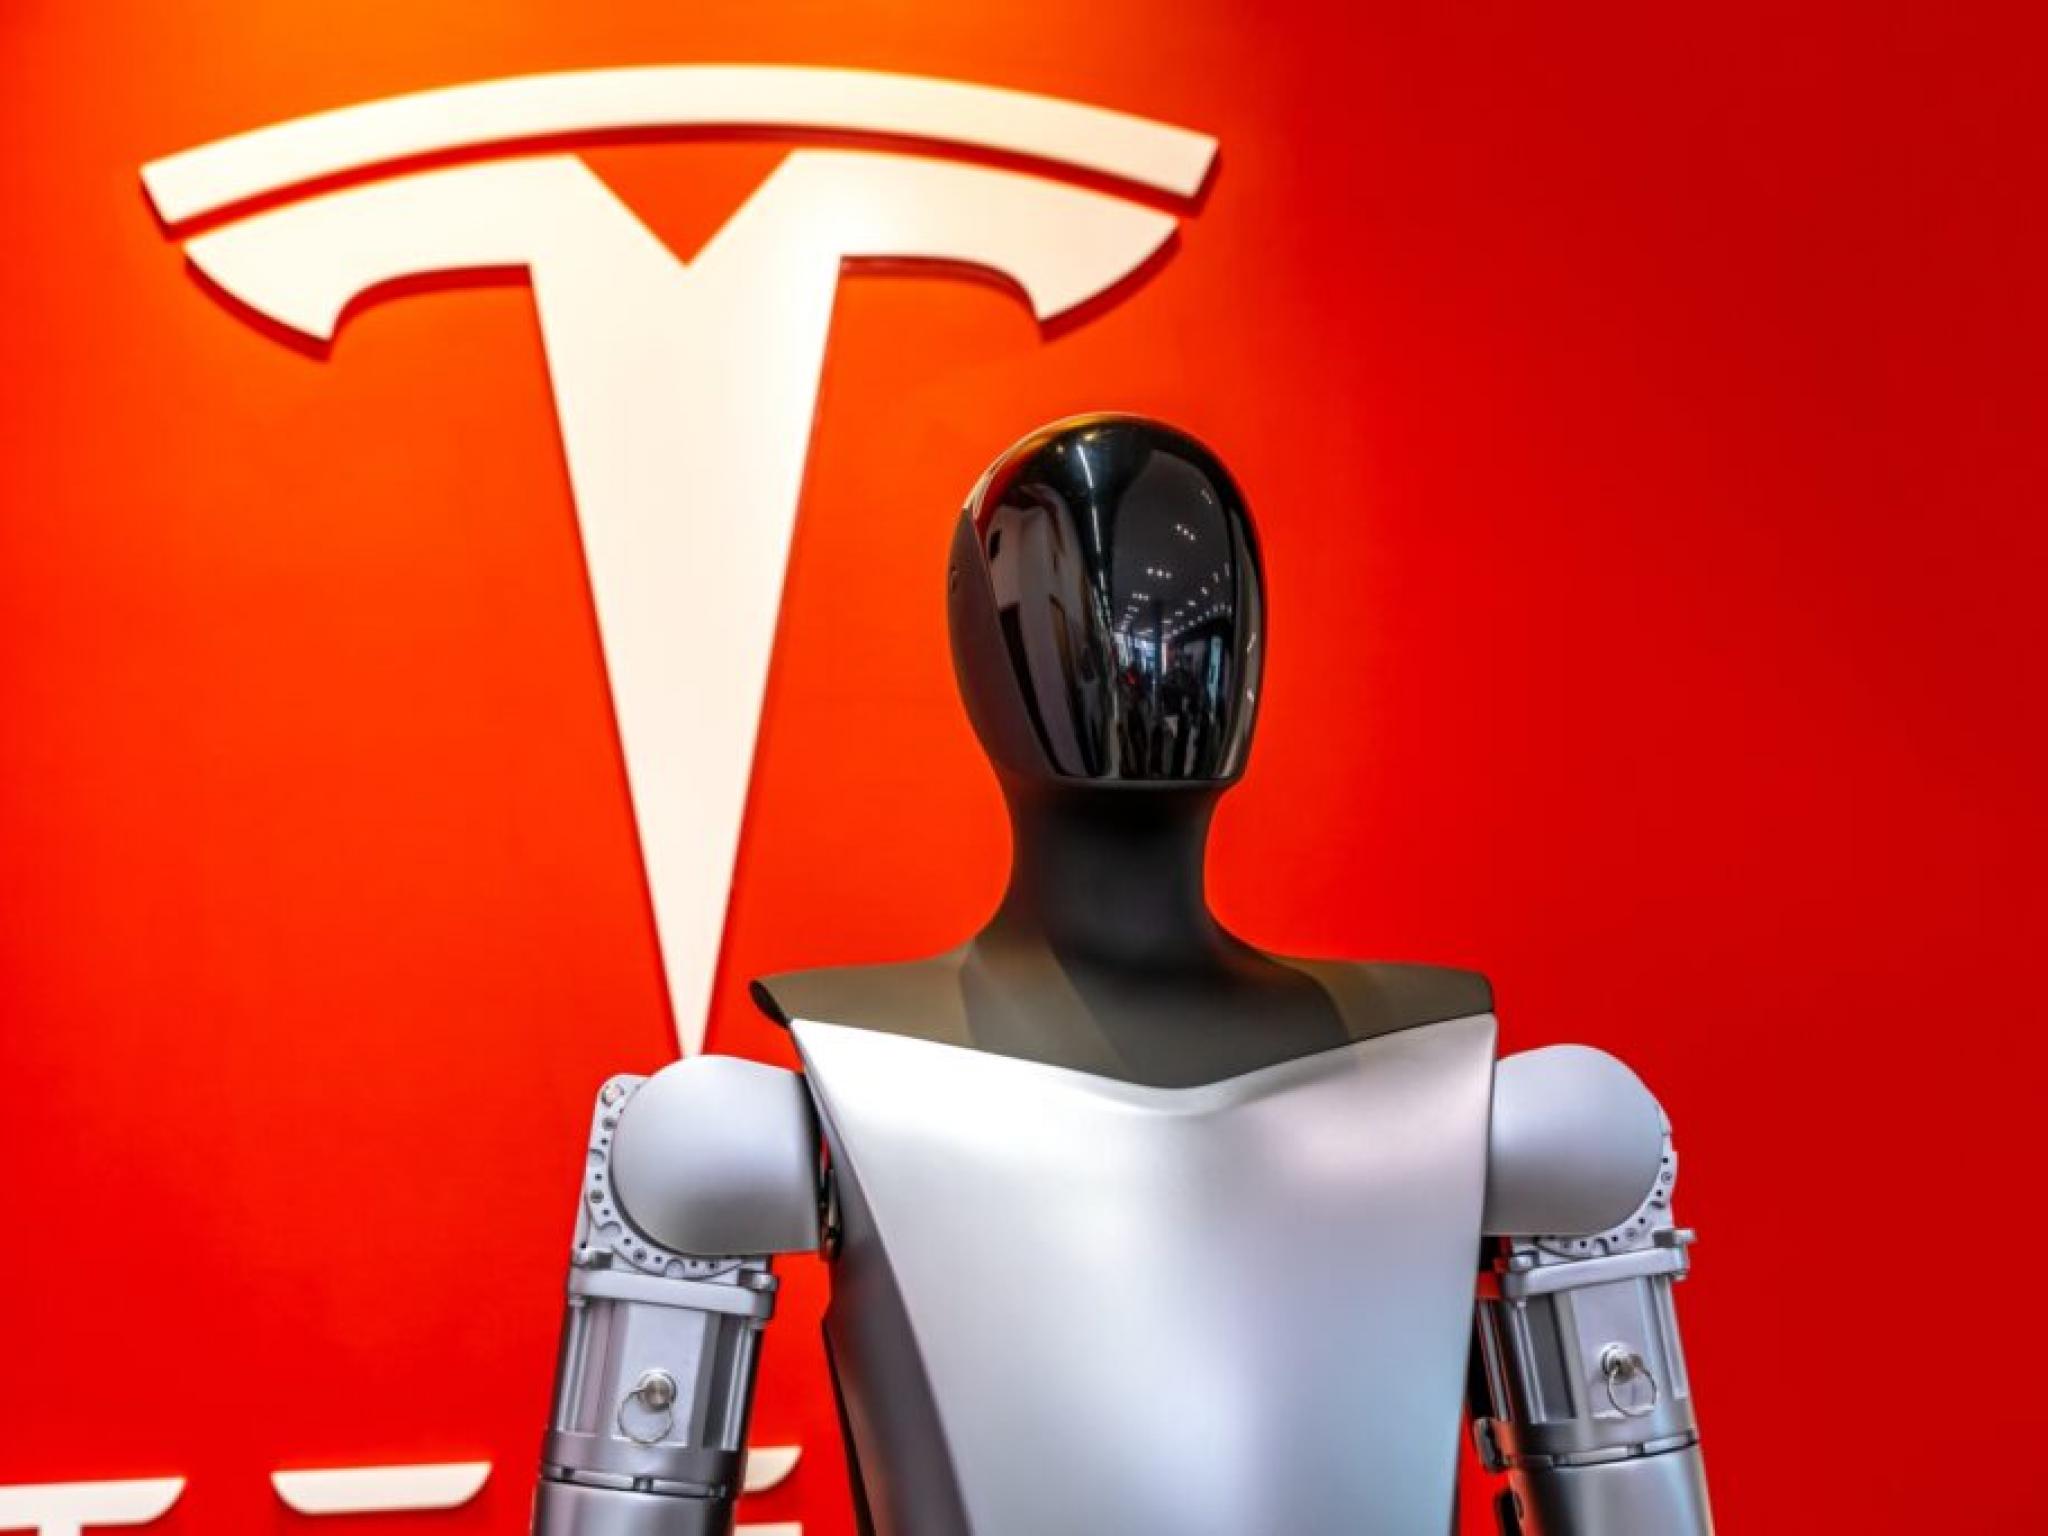  elon-musk-says-tesla-optimus-humanoid-robot-might-be-available-externally-by-the-end-of-next-year-heres-the-progress-report 